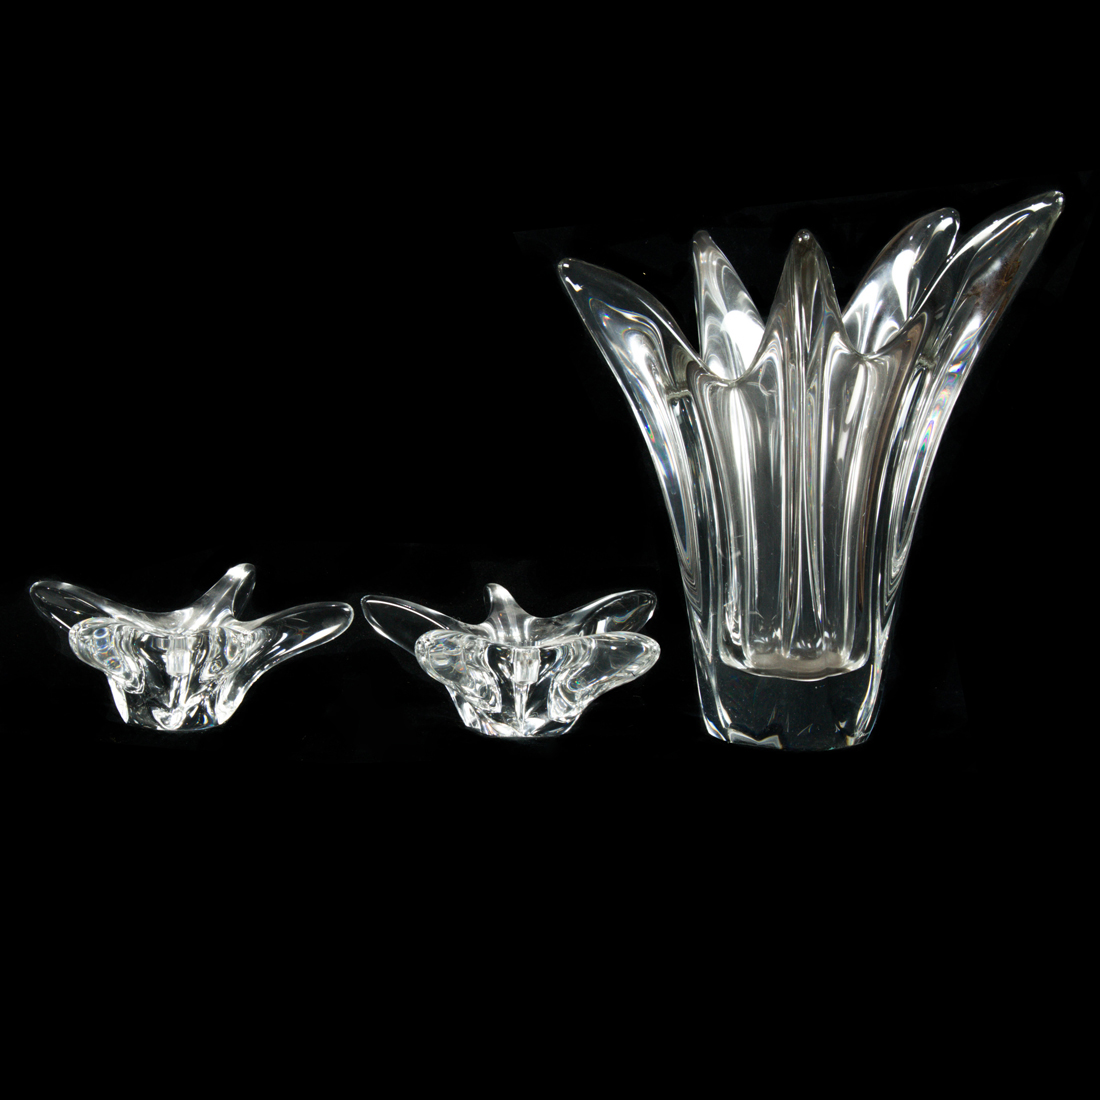  LOT OF 3 DAUM CLEAR GLASS FREE FORM 3a1a83